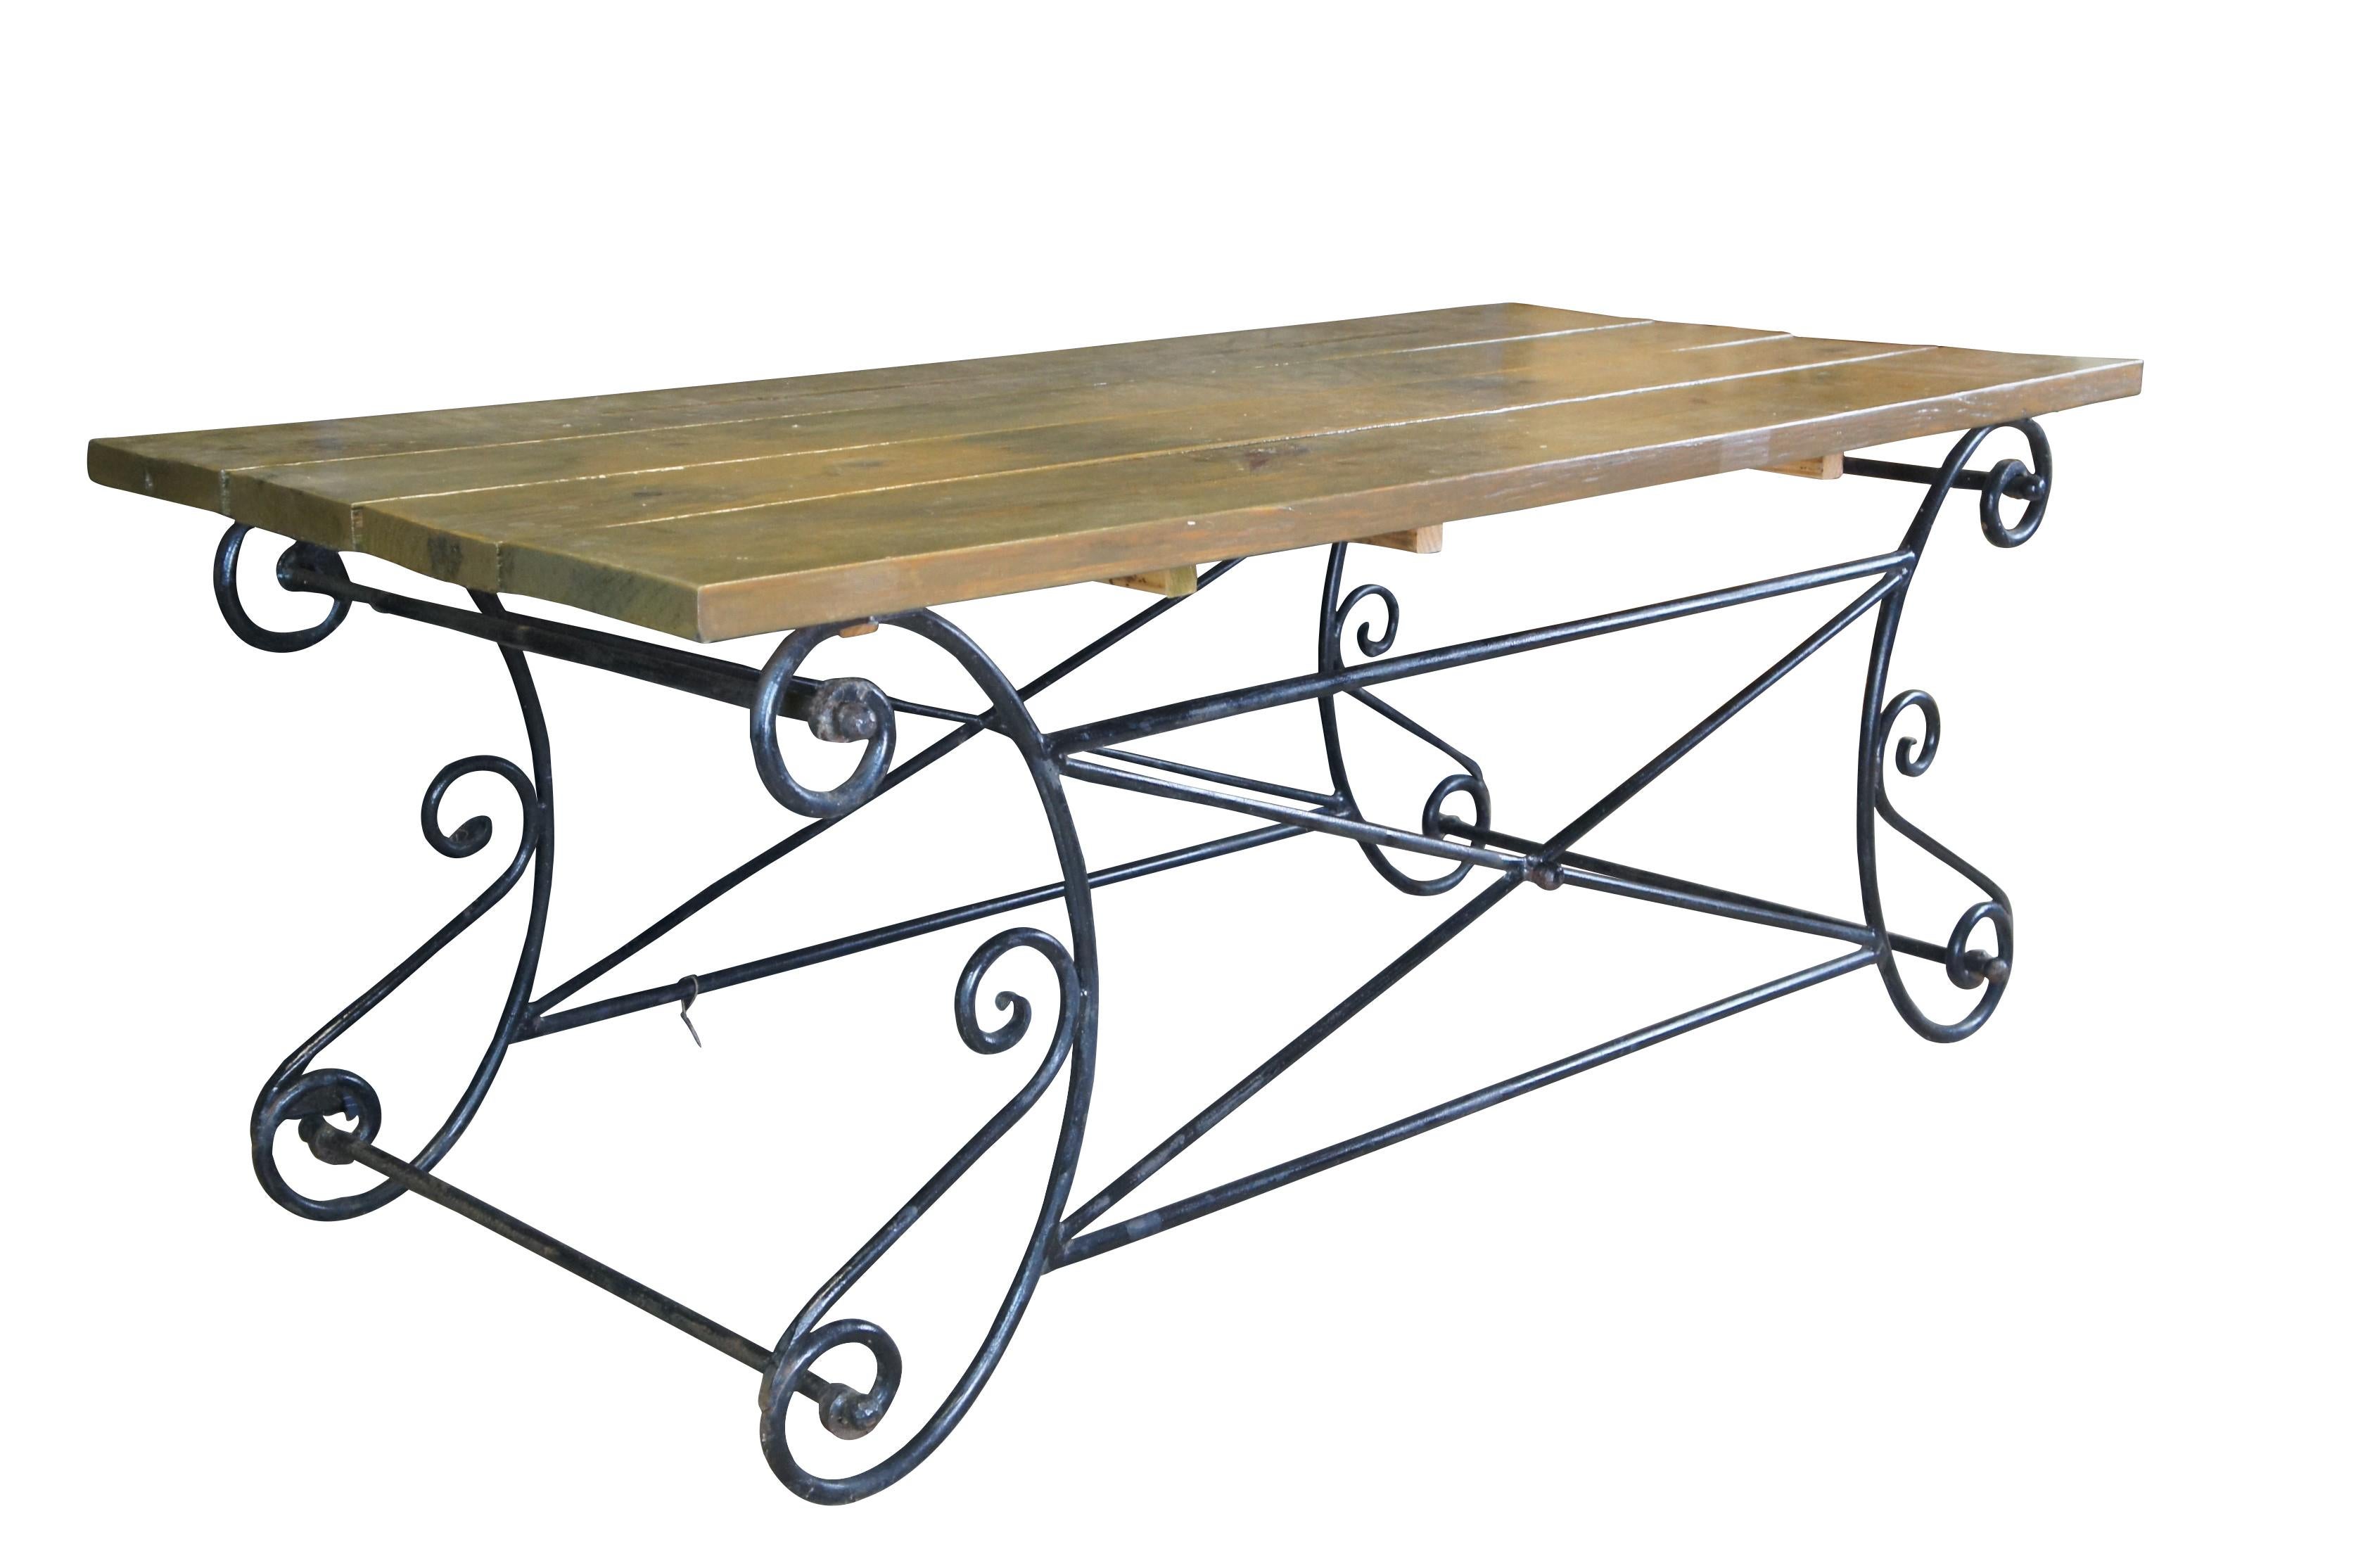 A nice blend of Neoclassical, Directoire and Farmhouse styling in this beautiful outdoor table. Made of iron featuring scrolled accents and pine plank top.

Dimensions:
72